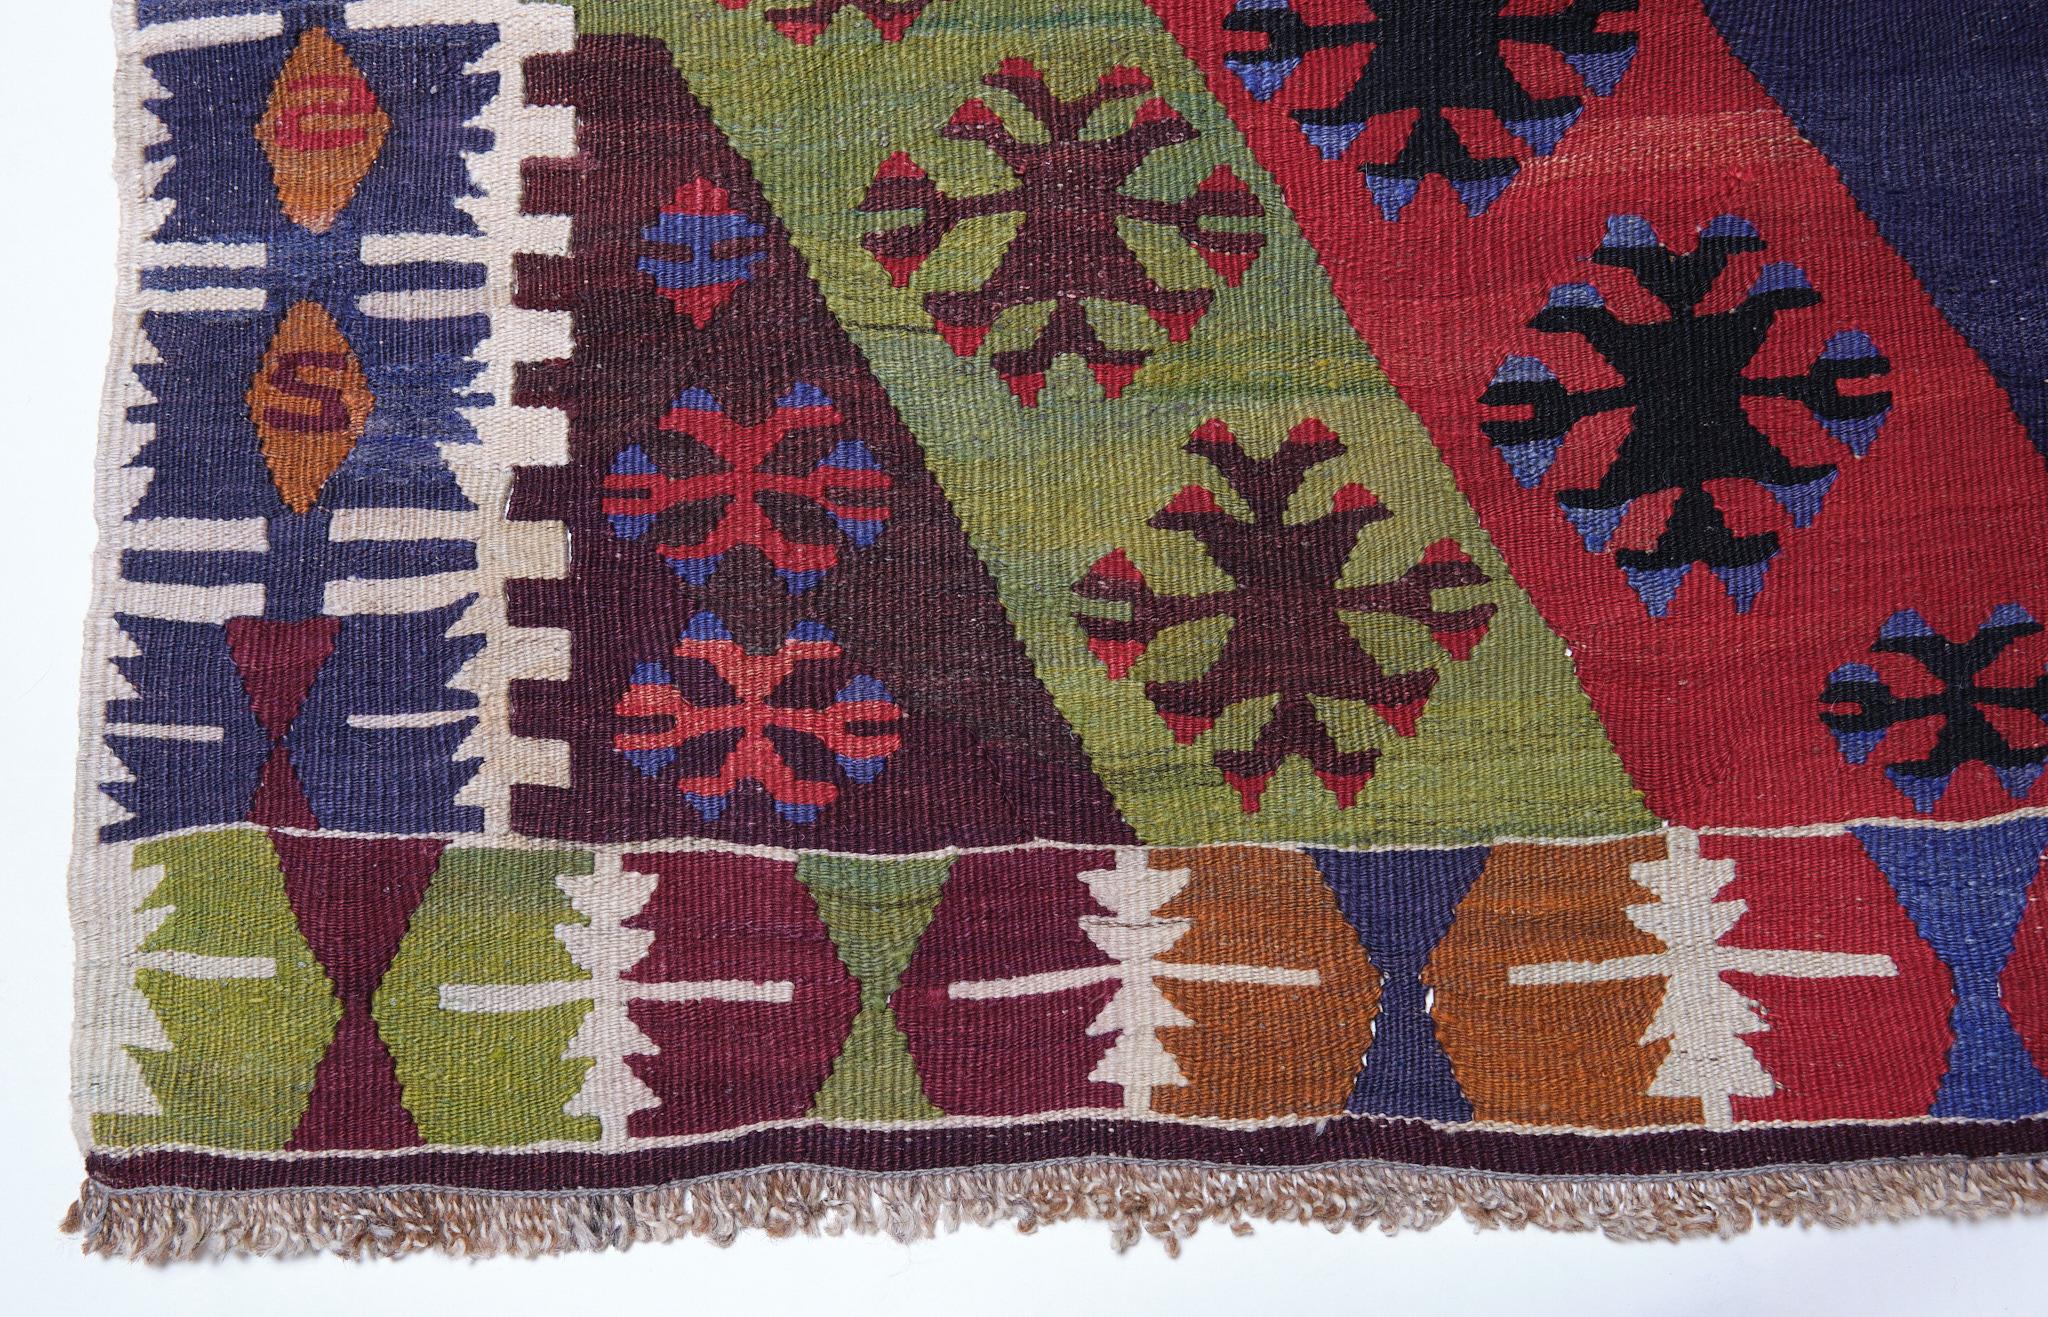 This is a South Eastern Anatolian old vintage Kilim from the Malatya region with a rare and beautiful color composition.

Malatya is a town built on one main street that continues for several miles. It is situated in the Tohmasuyu River basin